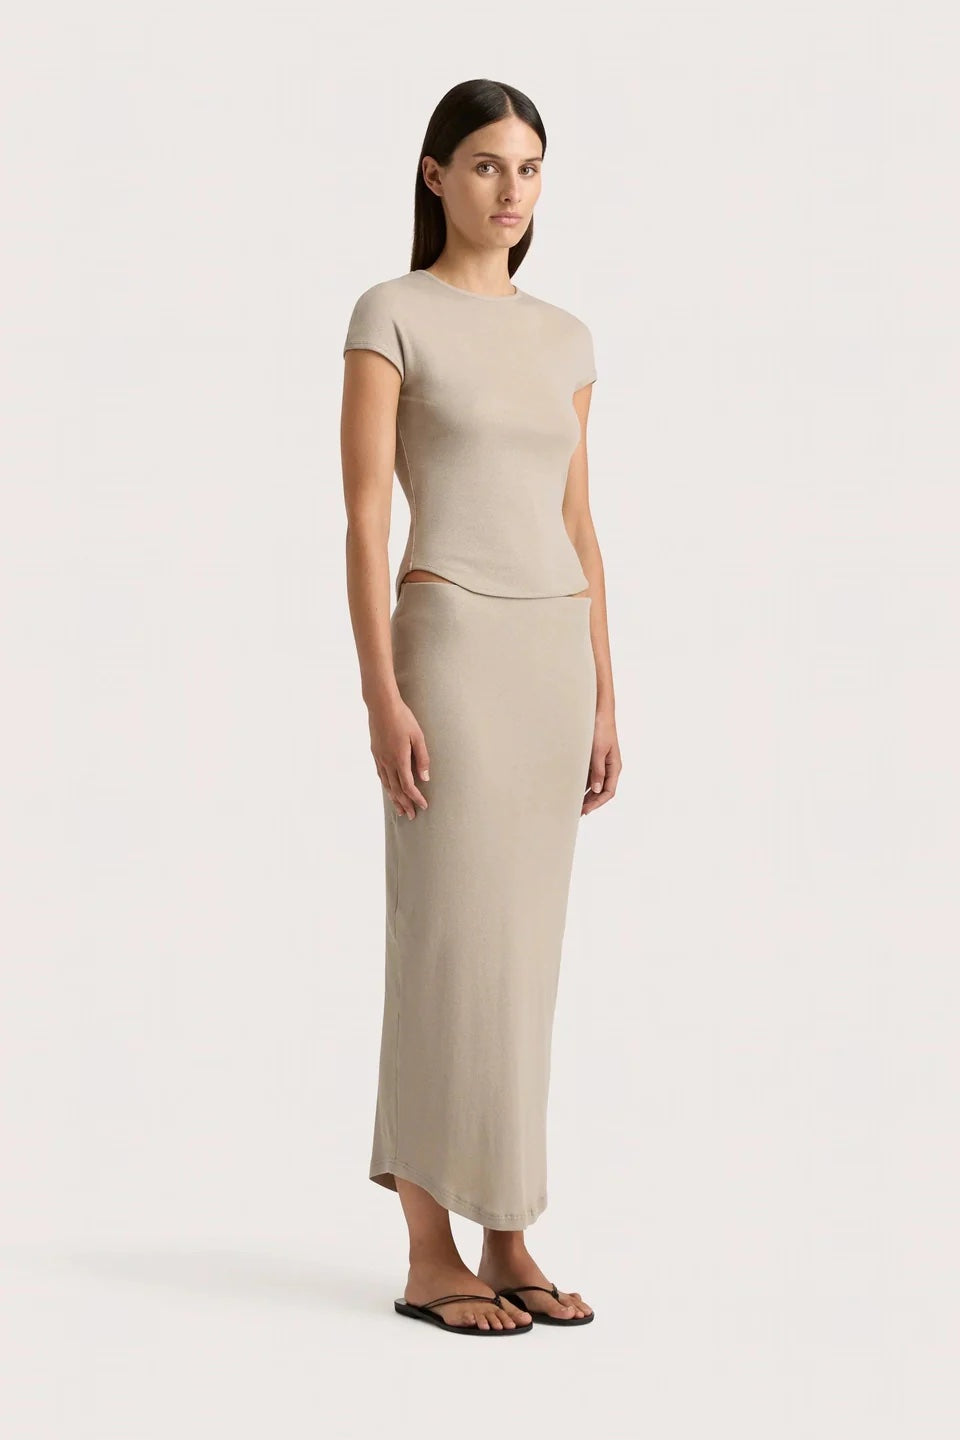 FAITHFULL THE BRAND Loire Skirt in Taupe | The New Trend